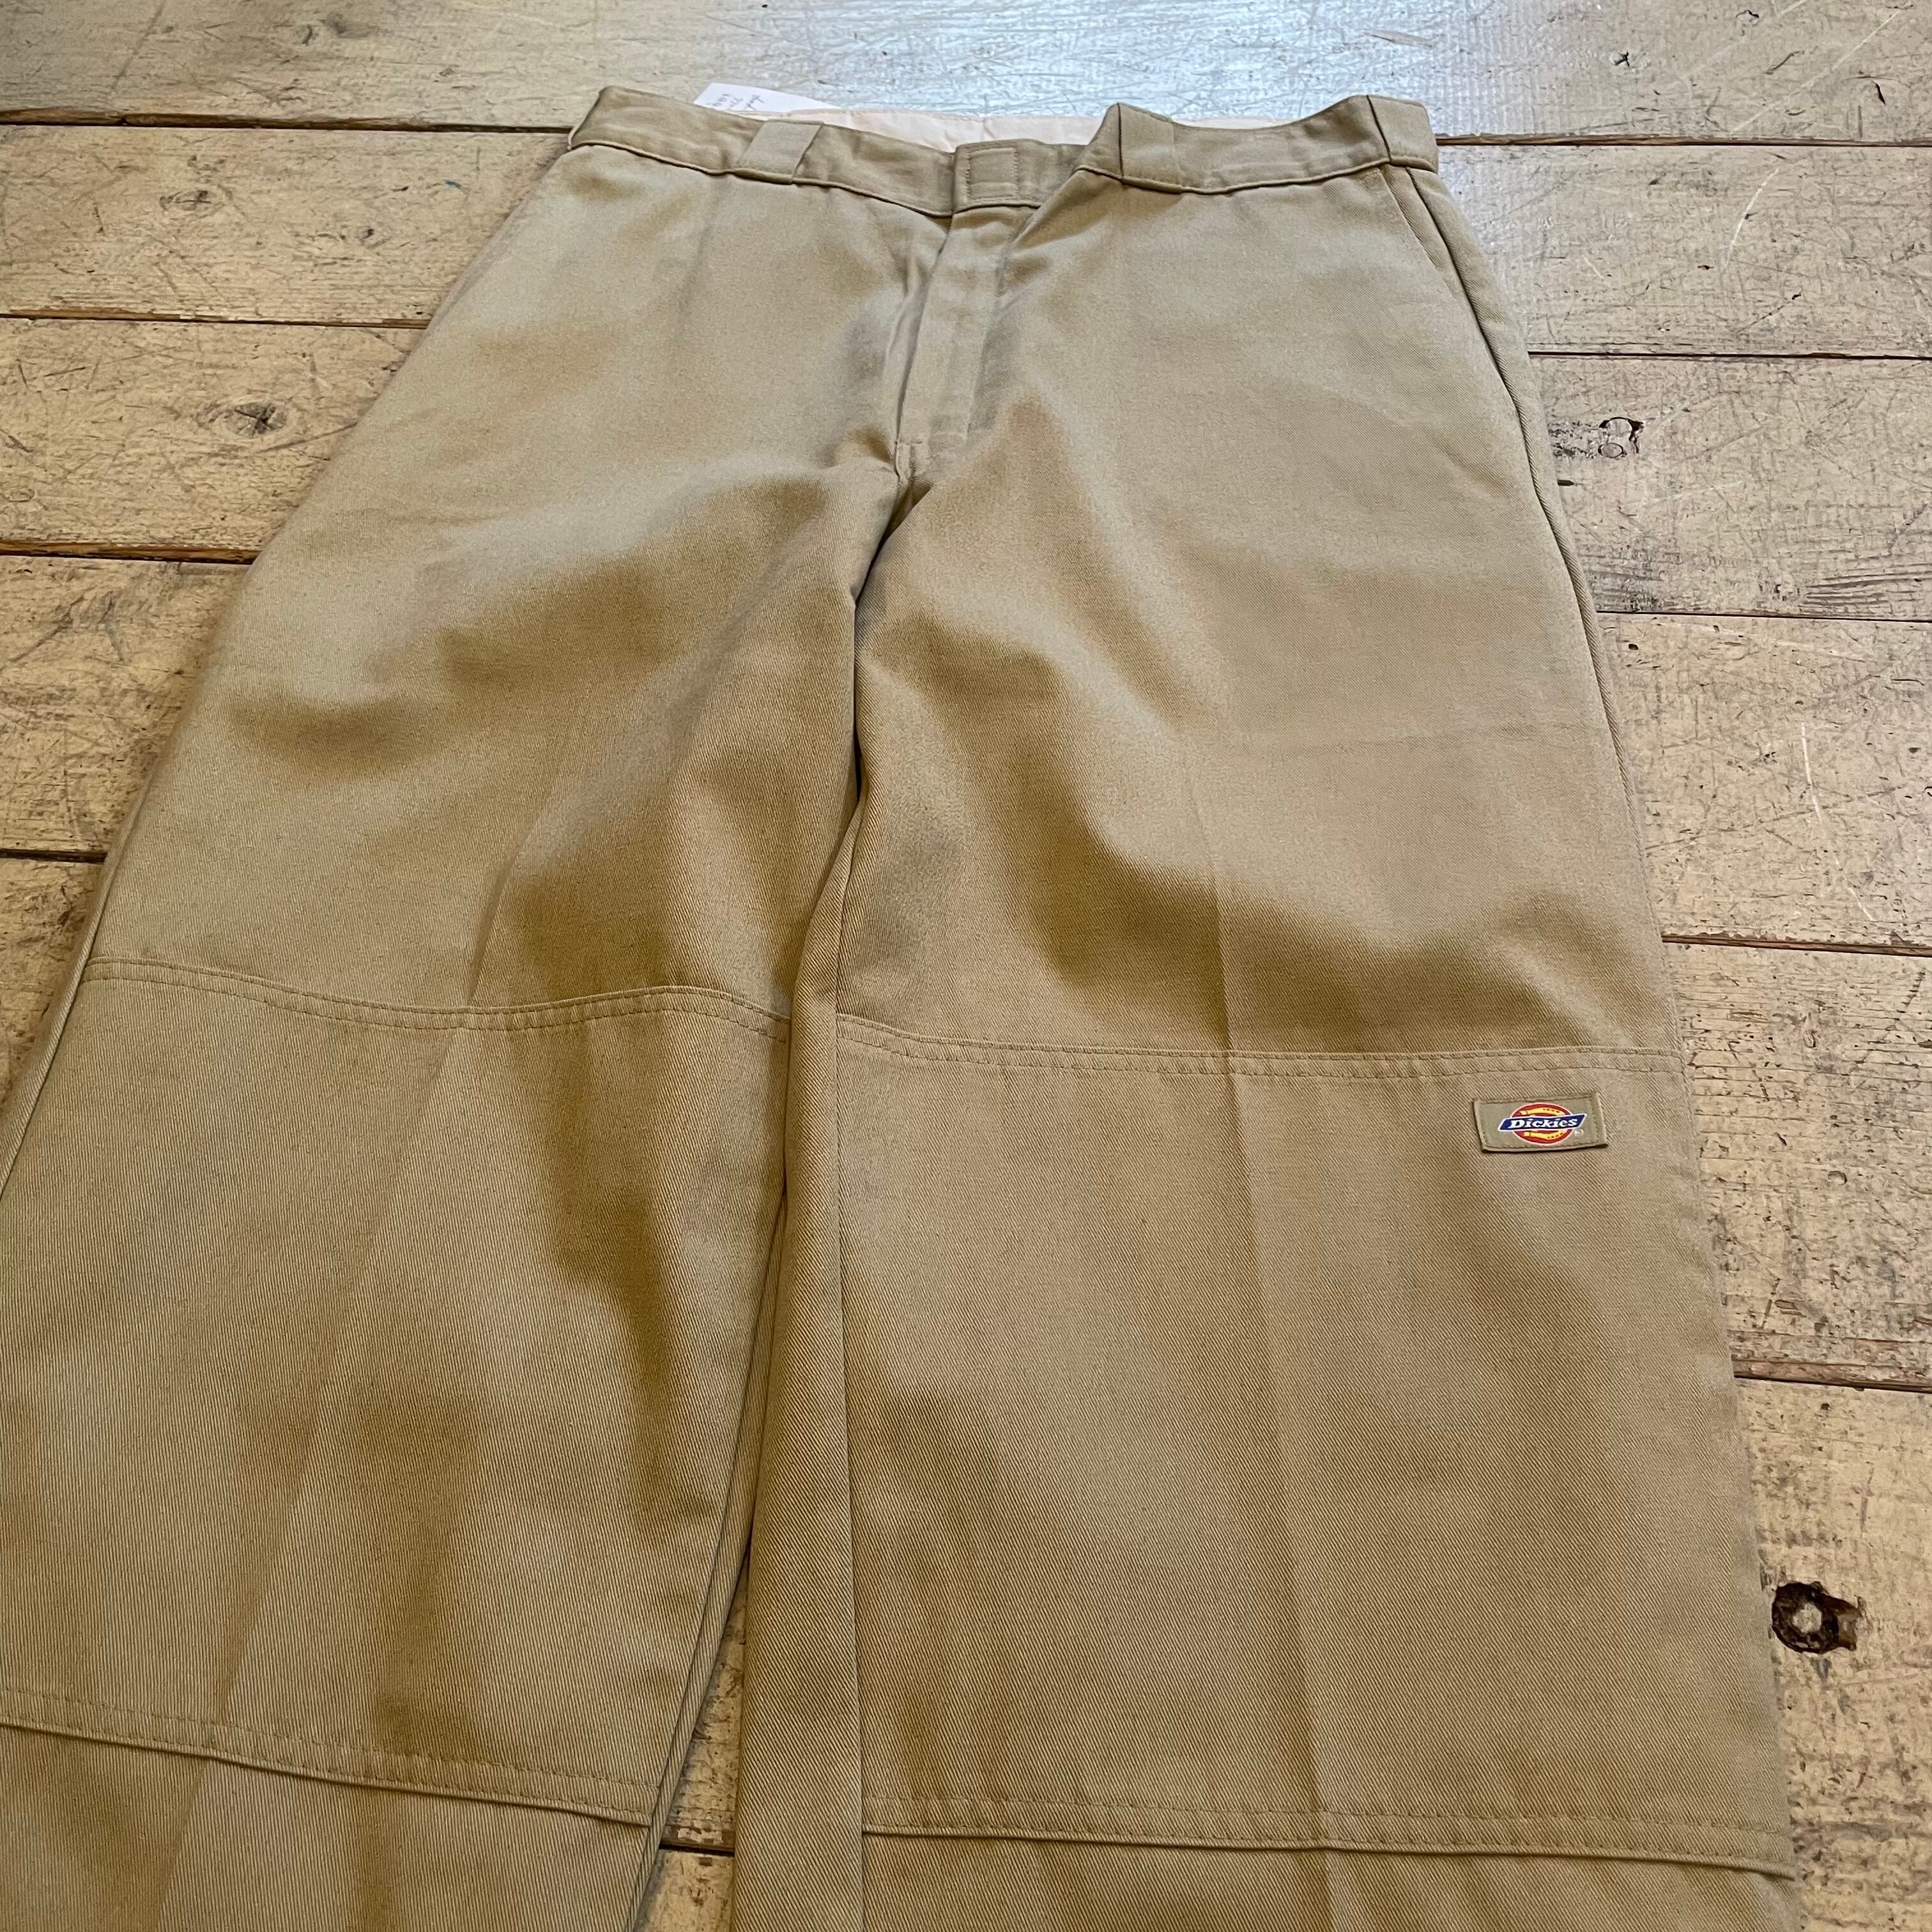 00s Dickies double knee work pants | What'z up